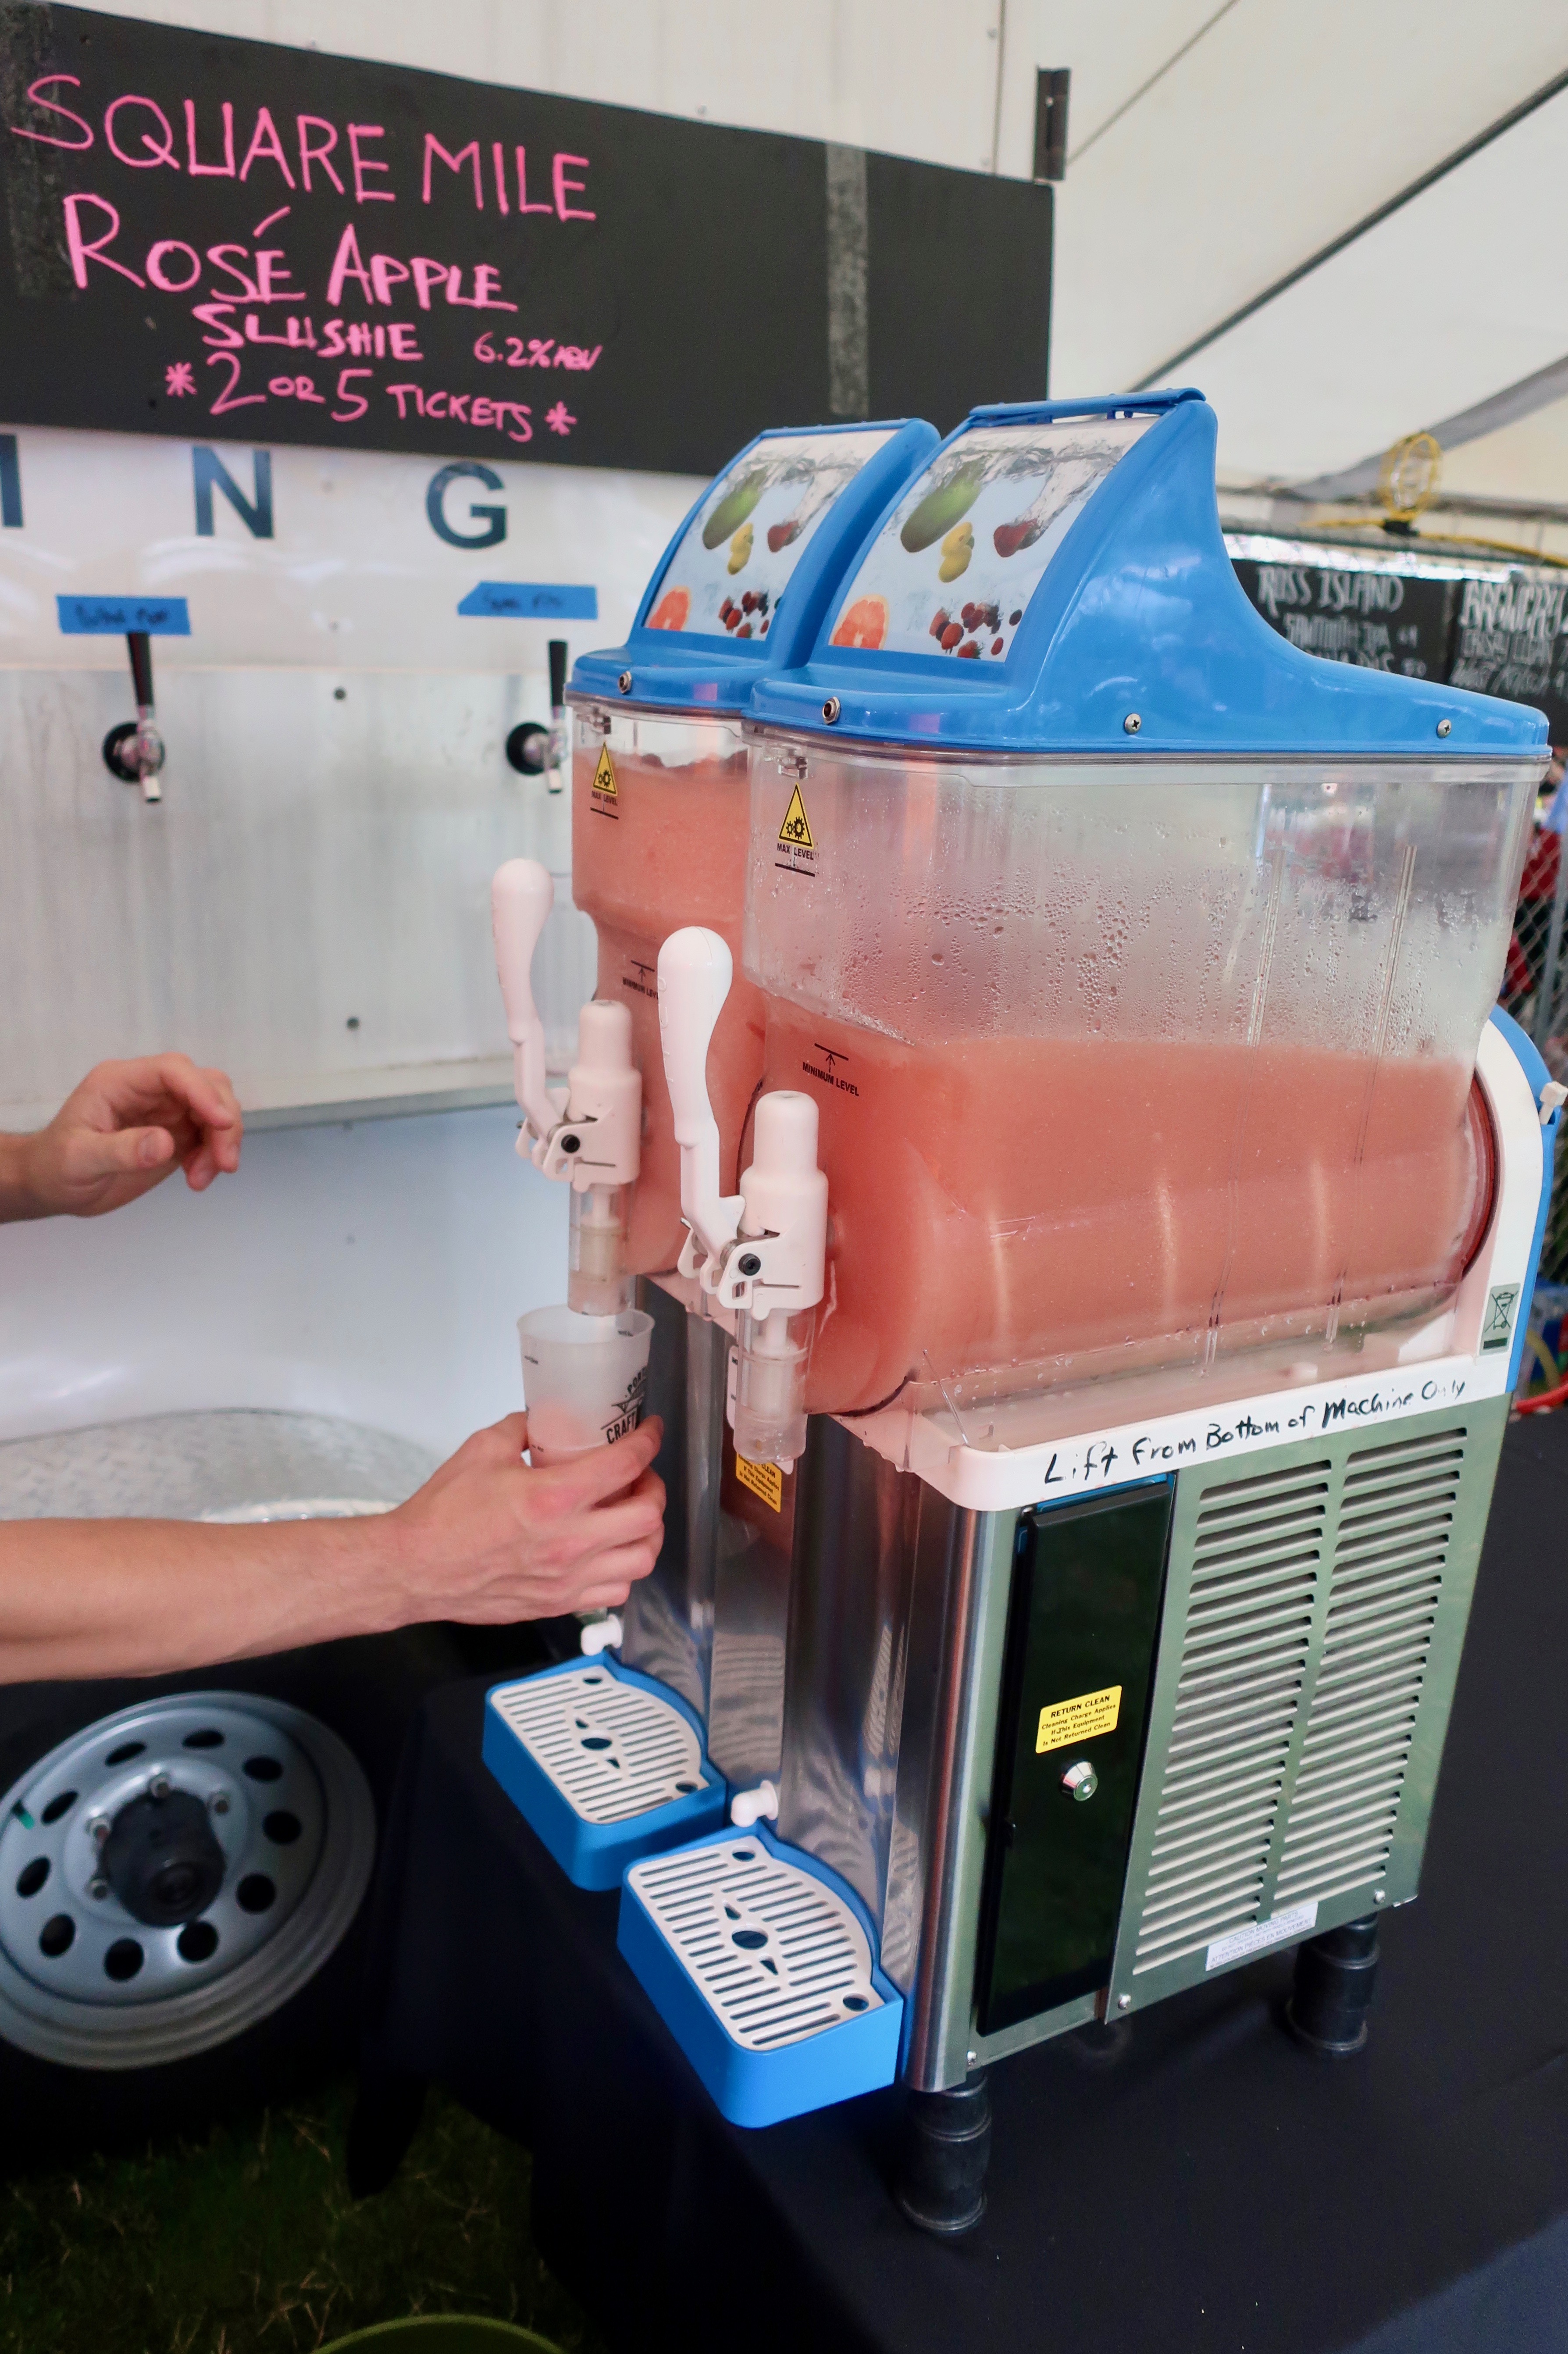 For the 2019 Portland Craft Beer Festival, the Slushie Machine features Square Mile Rosé Cider.